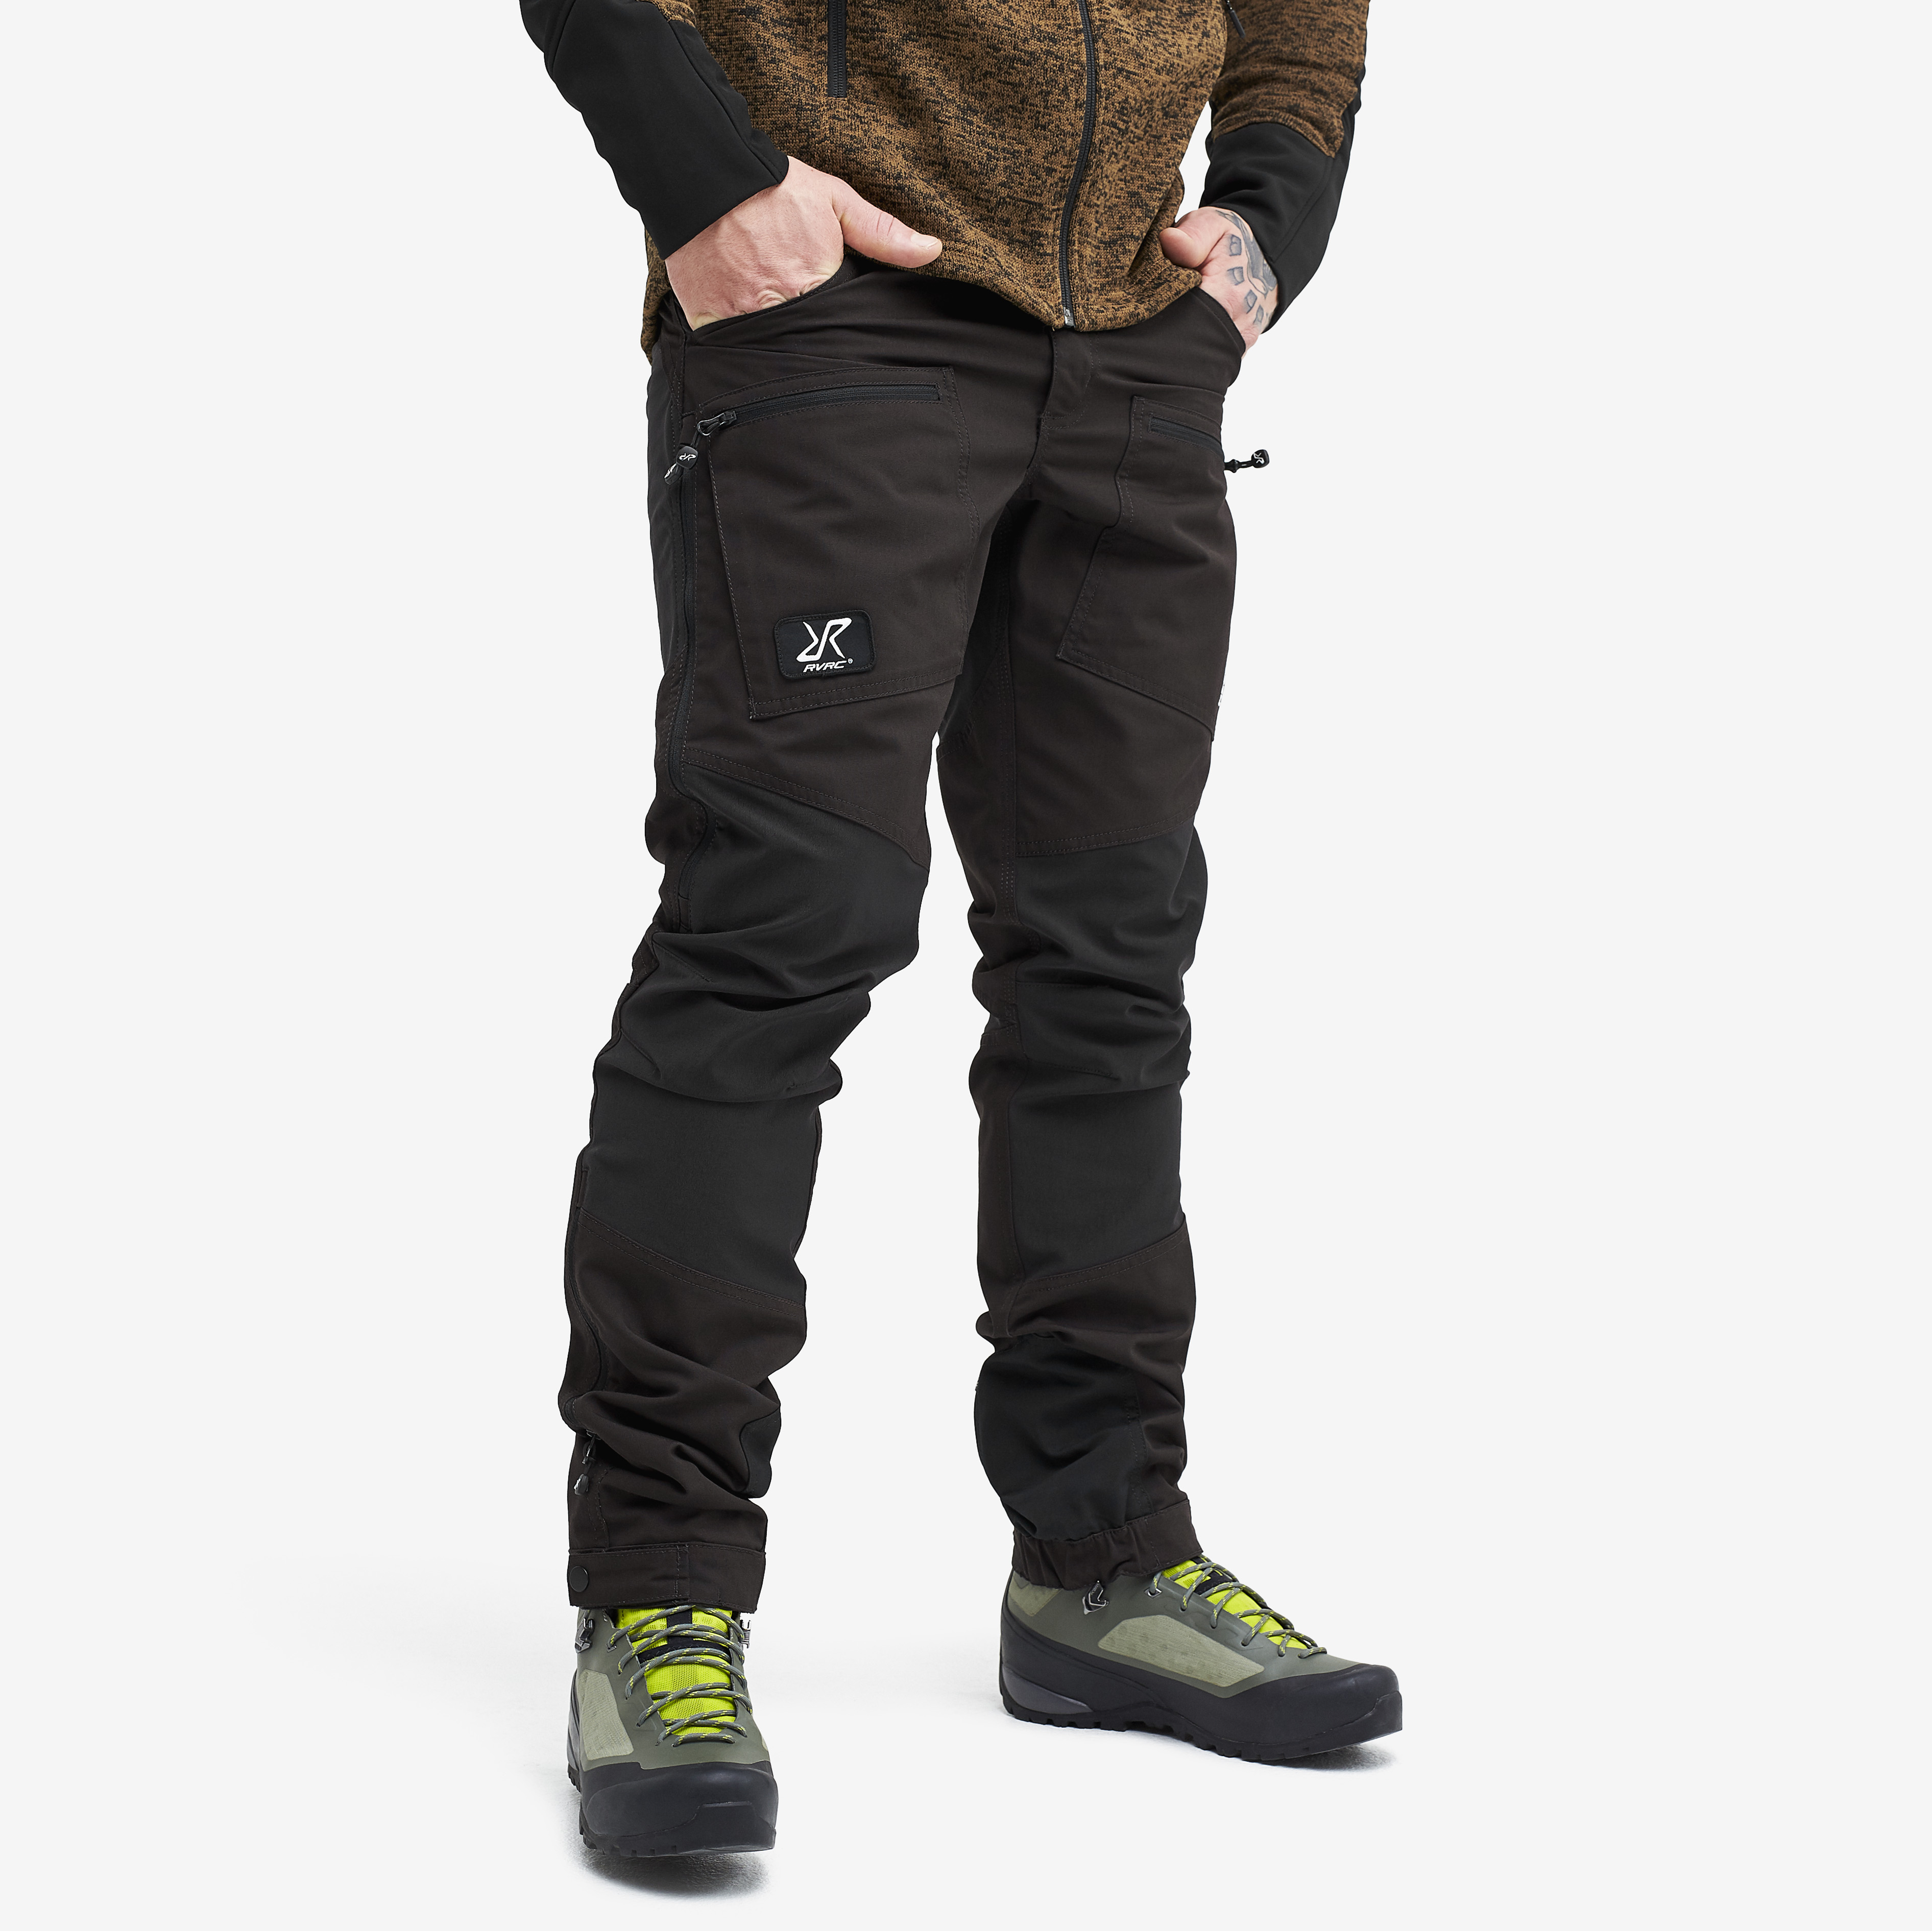 Nordwand Pro Rescue hiking trousers for men in black